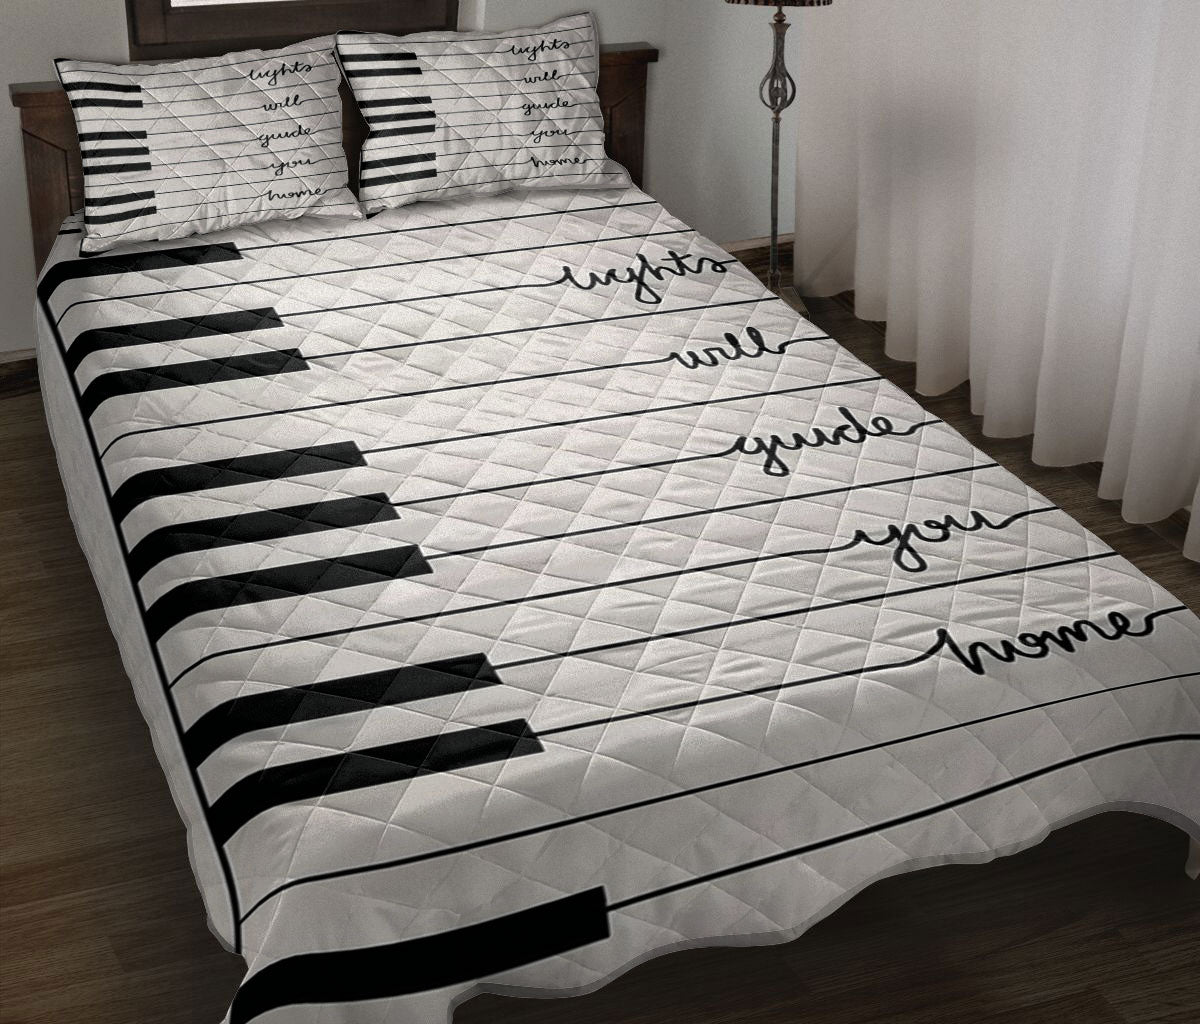 Ohaprints-Quilt-Bed-Set-Pillowcase-Piano-Light-Will-Guide-You-Home-Piano-Keys-Music-Notes-Gift-For-Pianist-Blanket-Bedspread-Bedding-2662-Throw (55'' x 60'')